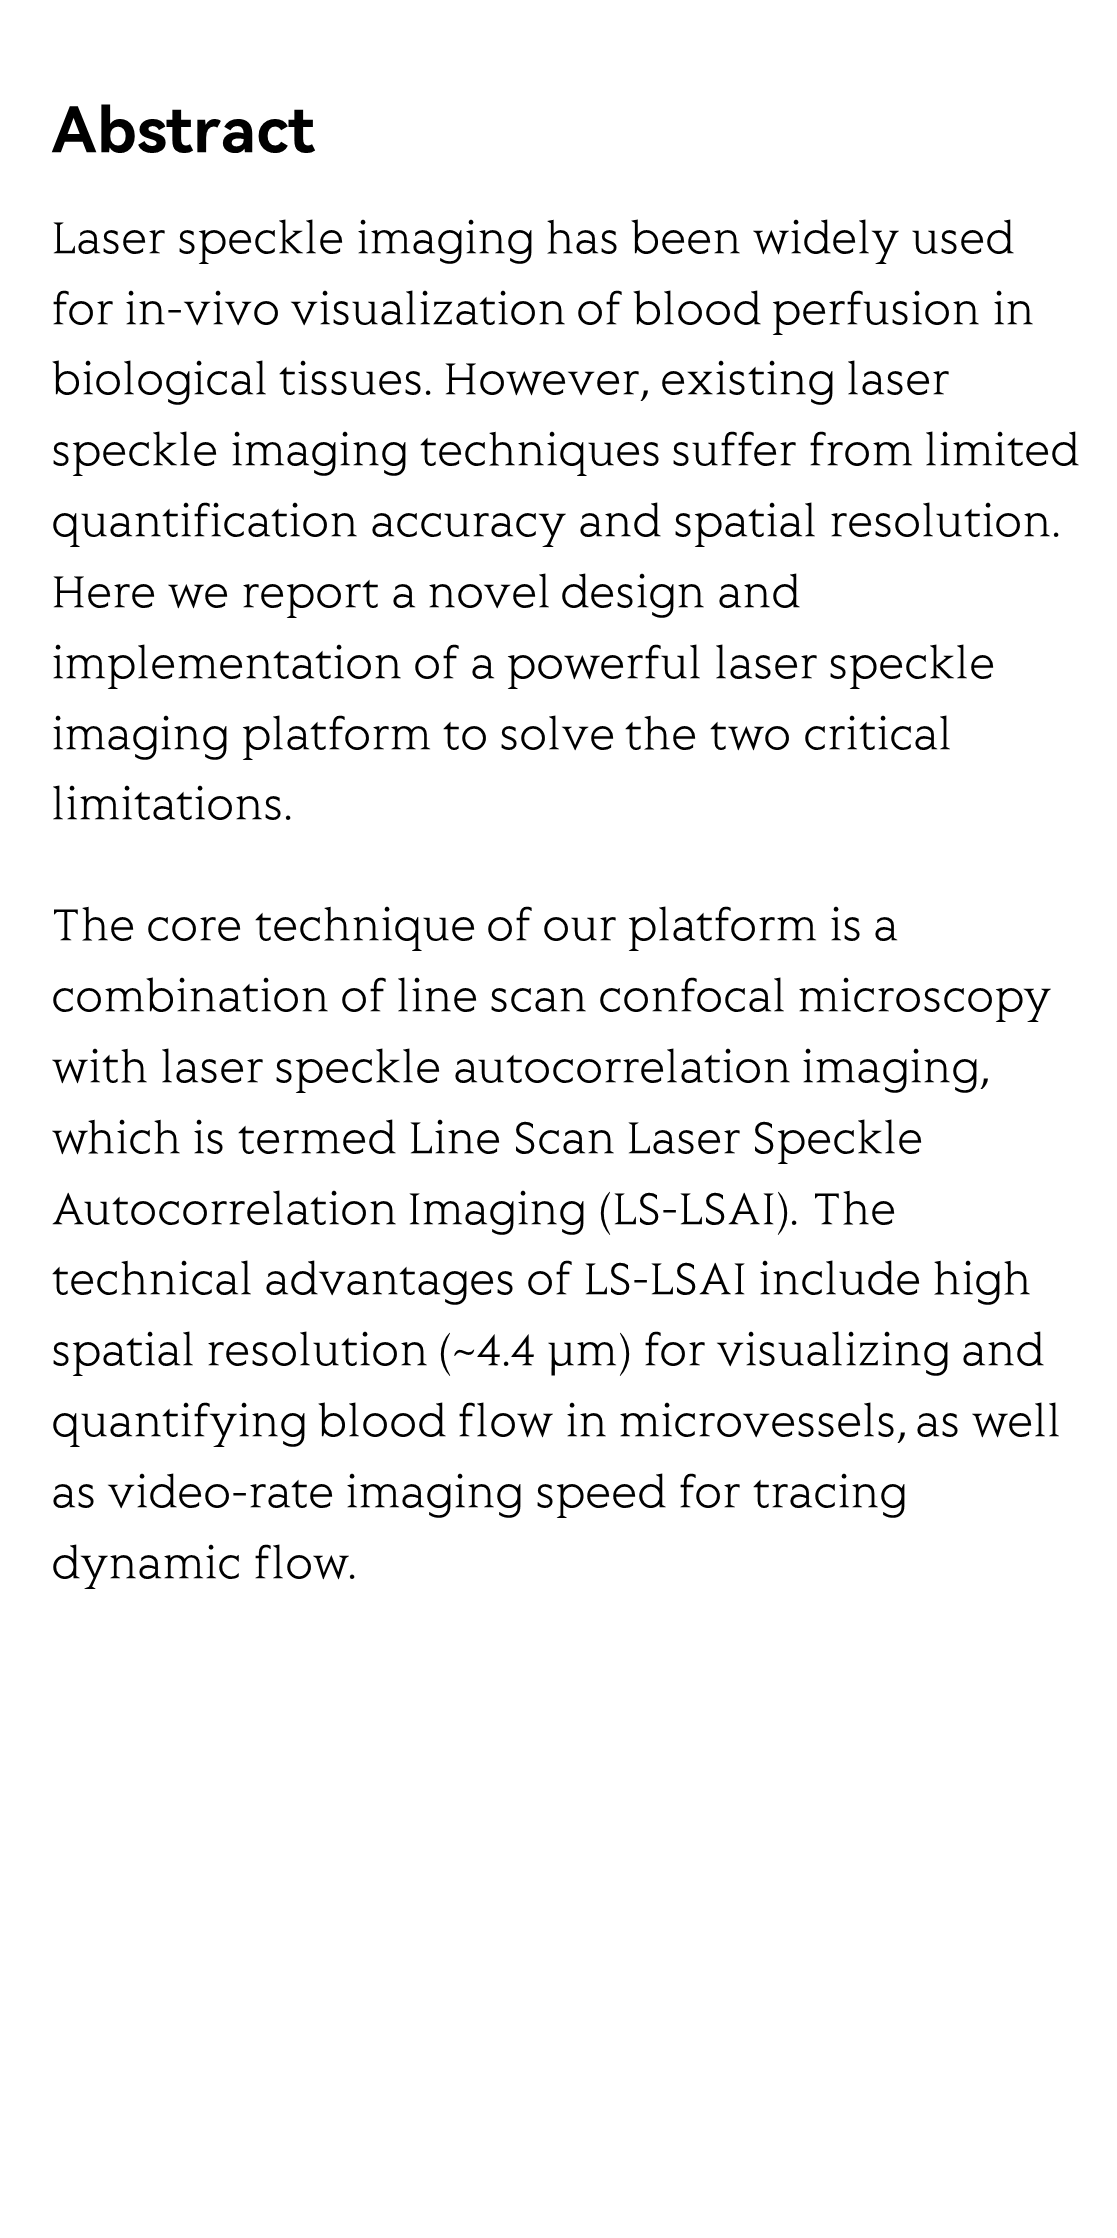 Confocal laser speckle autocorrelation imaging of dynamic flow in microvasculature_2